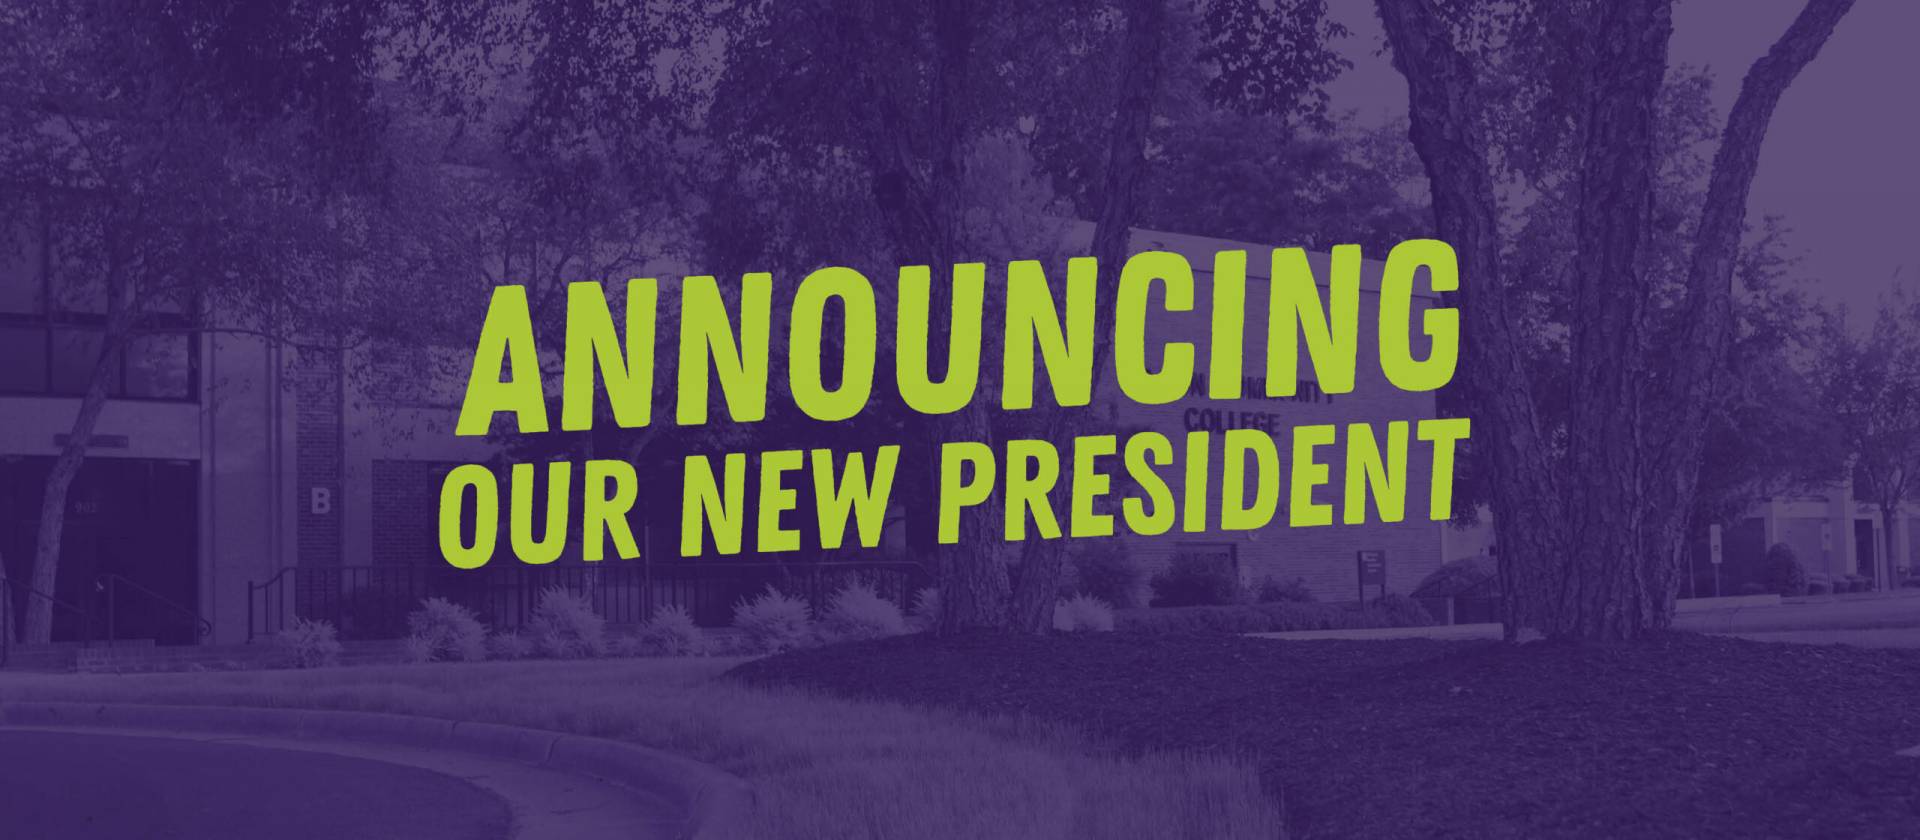 Announcing our new president